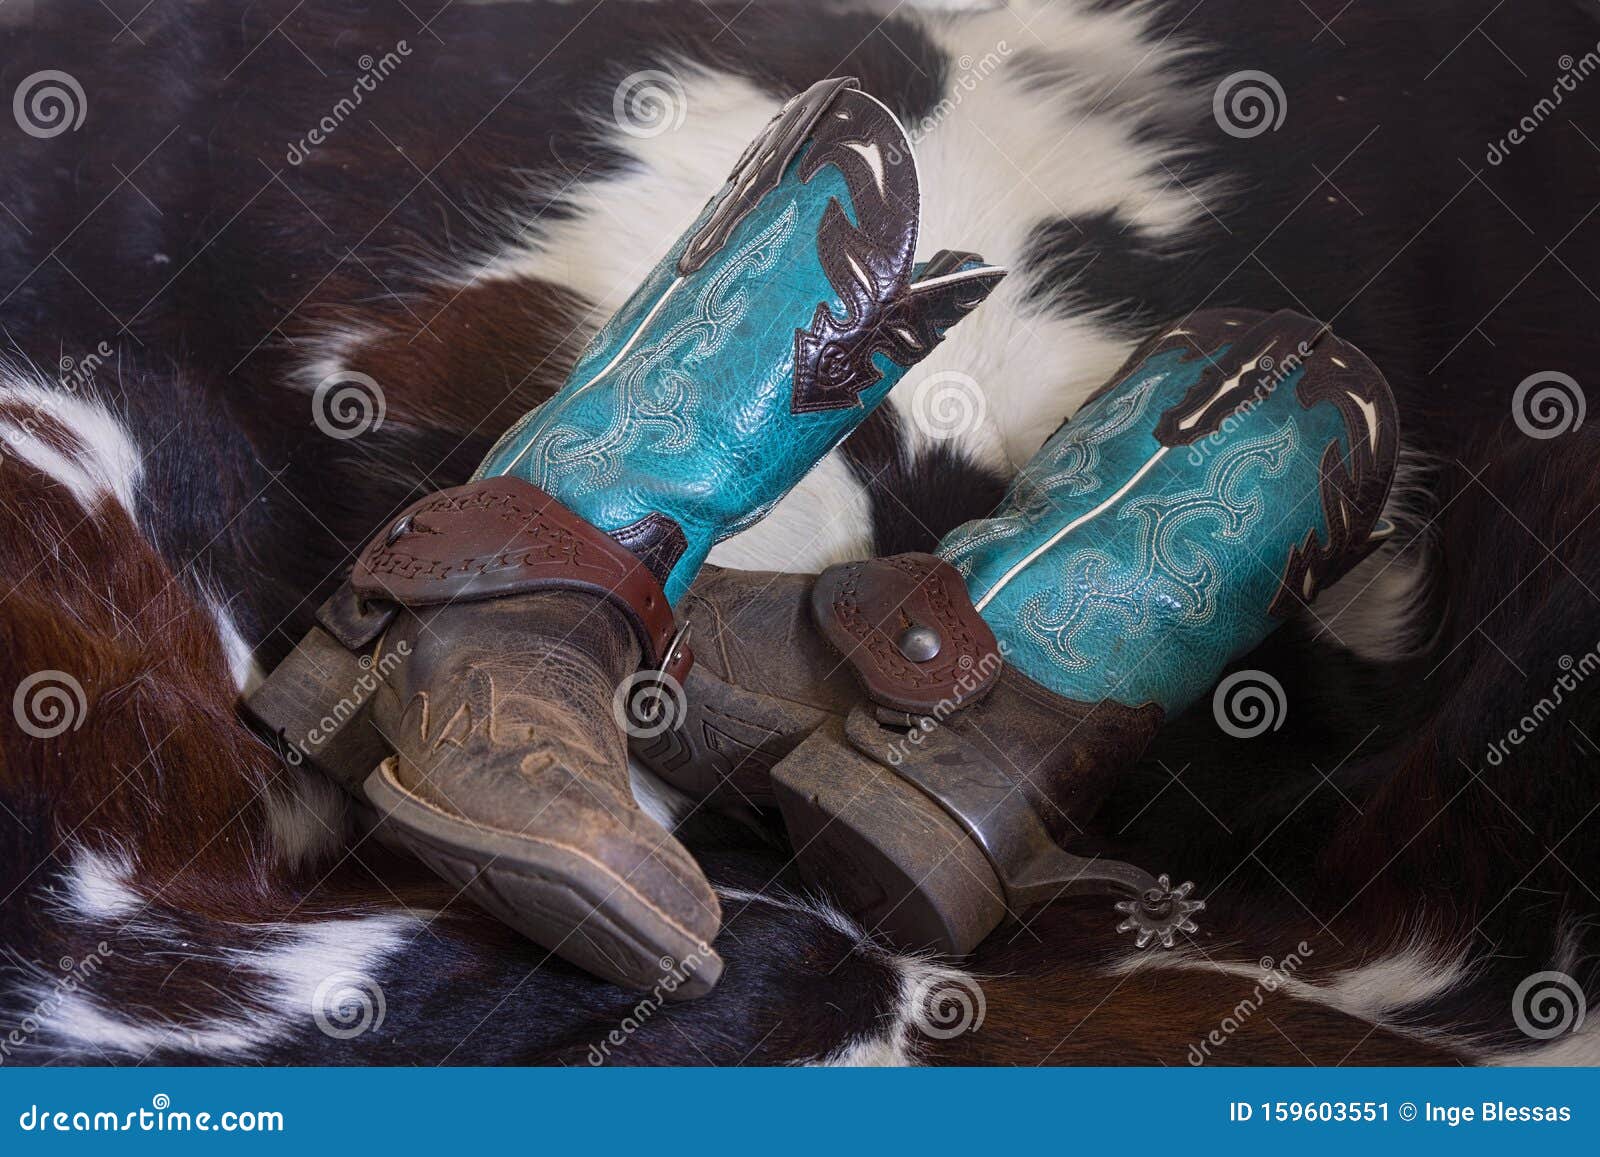 https://thumbs.dreamstime.com/z/pretty-boots-cowgirl-blue-brown-elaborate-stitching-patterns-patterned-cowhide-rug-dusty-outrageous-cowboy-159603551.jpg